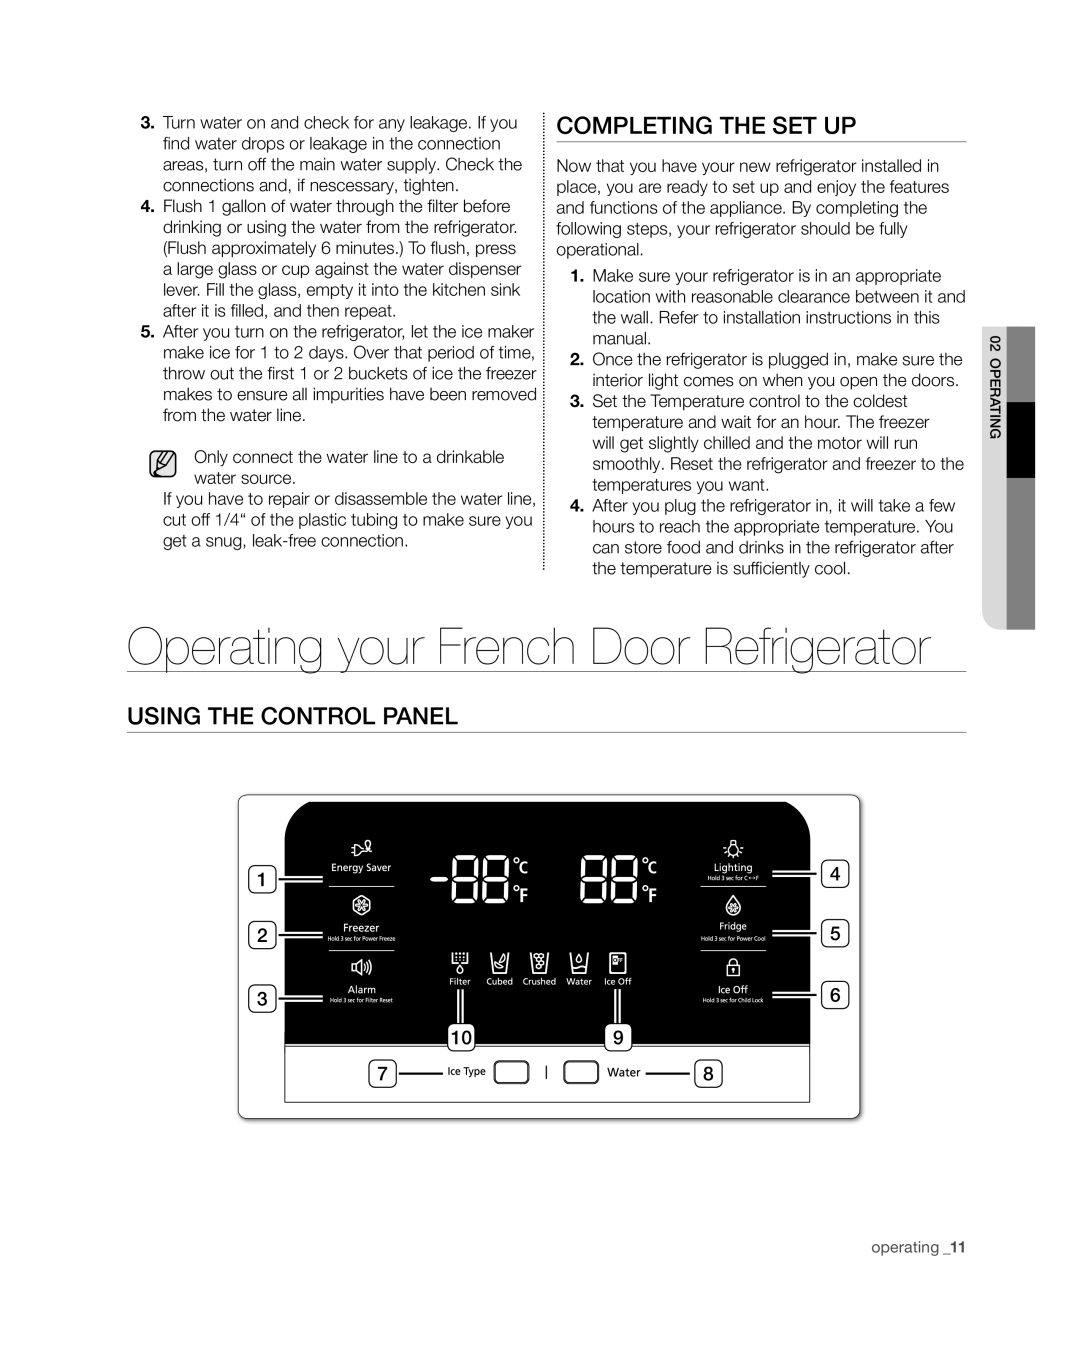 Samsung RF4267HA user manual Completing the set up, Using the control panel, Operating your French Door Refrigerator 